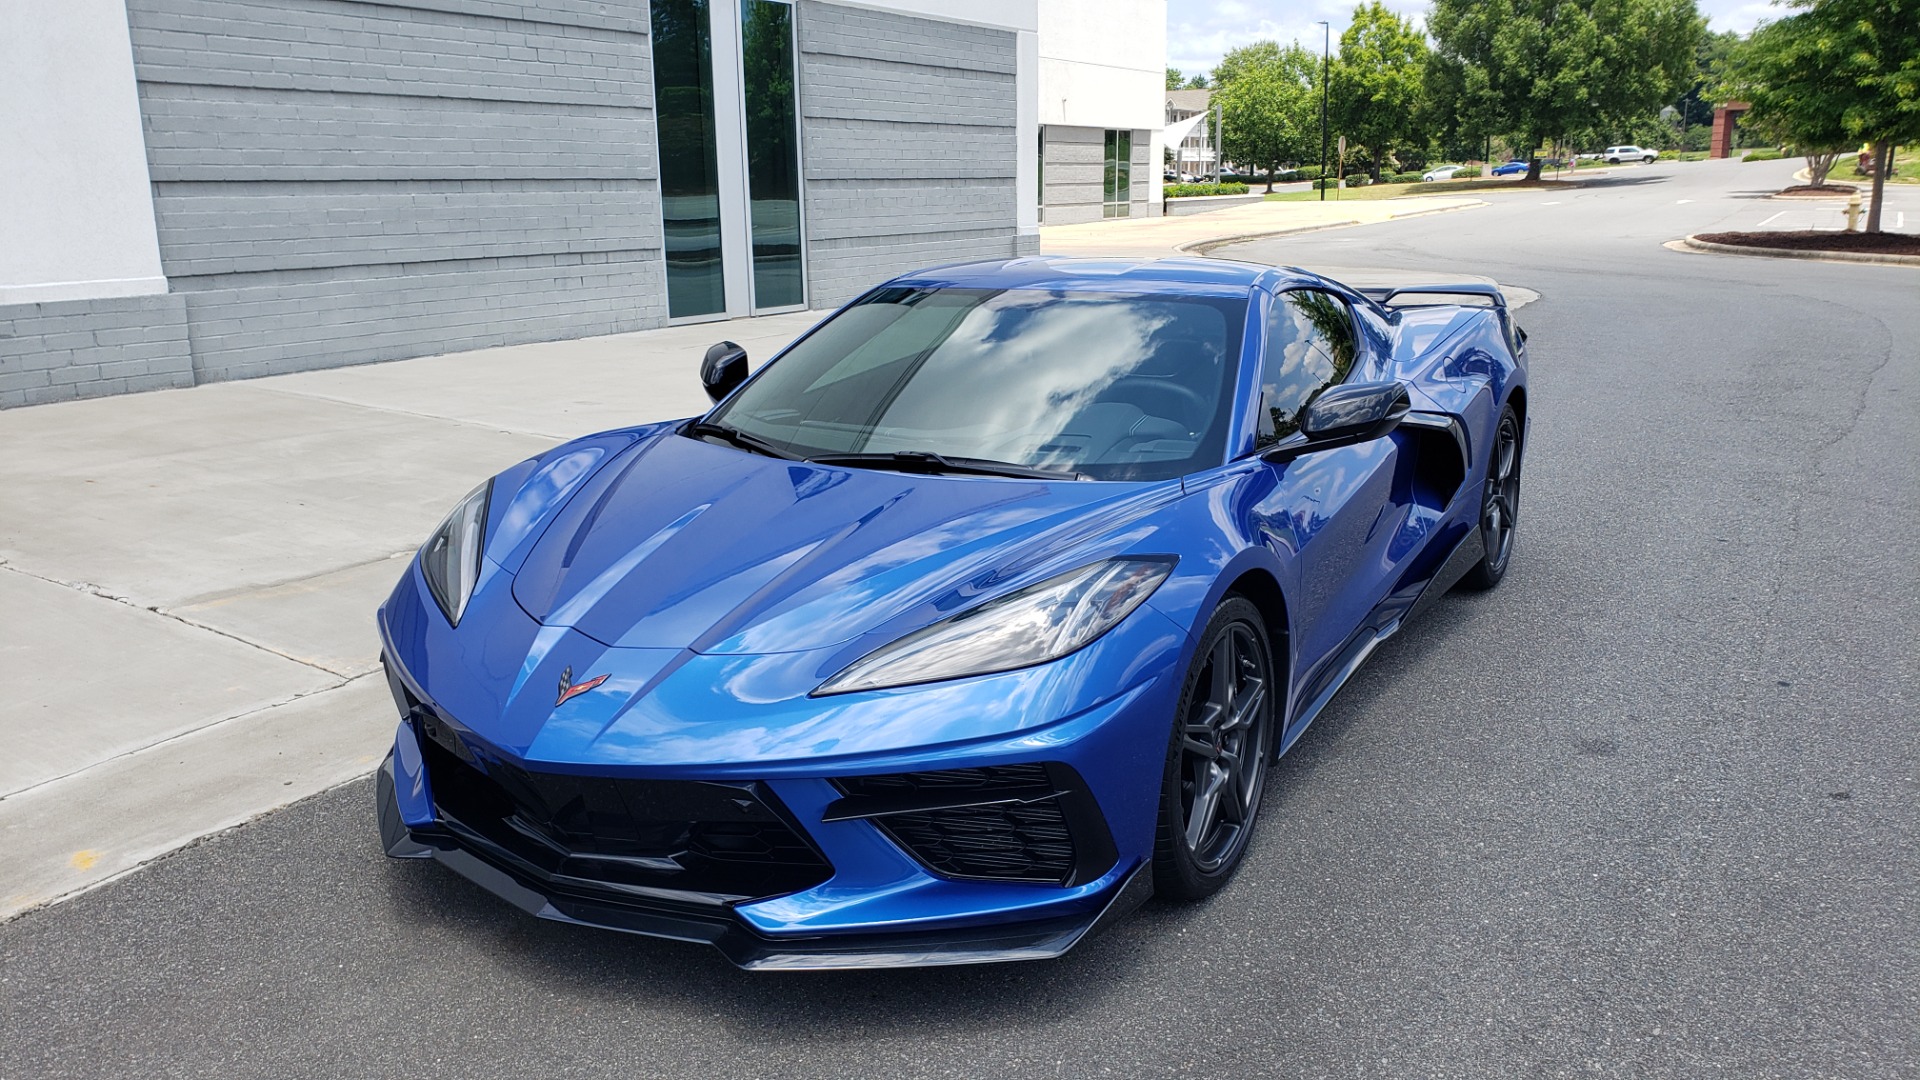 Used 2020 Chevrolet CORVETTE C8 STINGRAY COUPE 2LT / PERF & Z51 PKG / NAV / BOSE / 8-SPD AUTO / REARVIEW for sale Sold at Formula Imports in Charlotte NC 28227 3